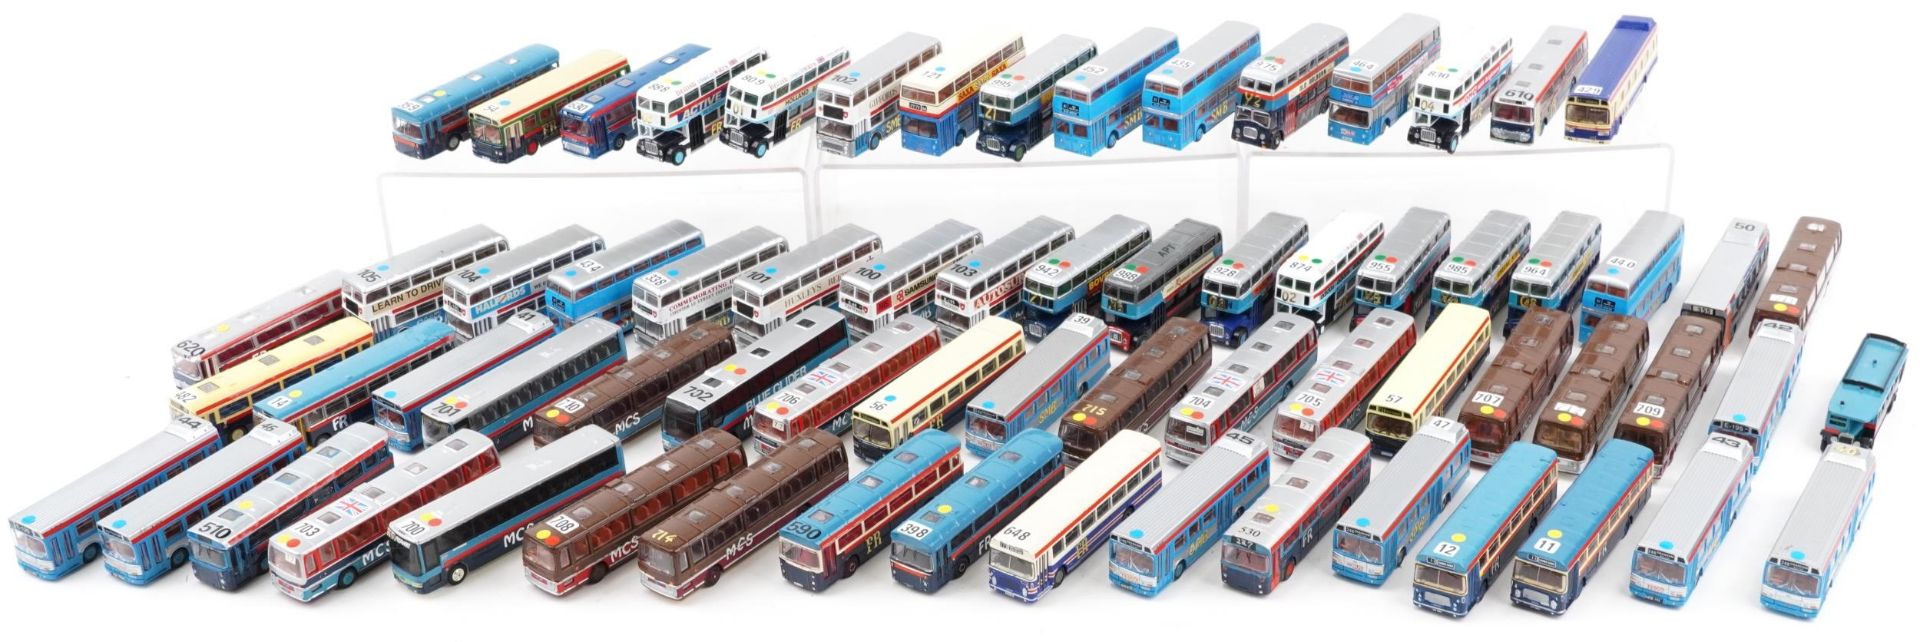 Large collection of diecast model buses, predominantly Corgi and Exclusive First Editions